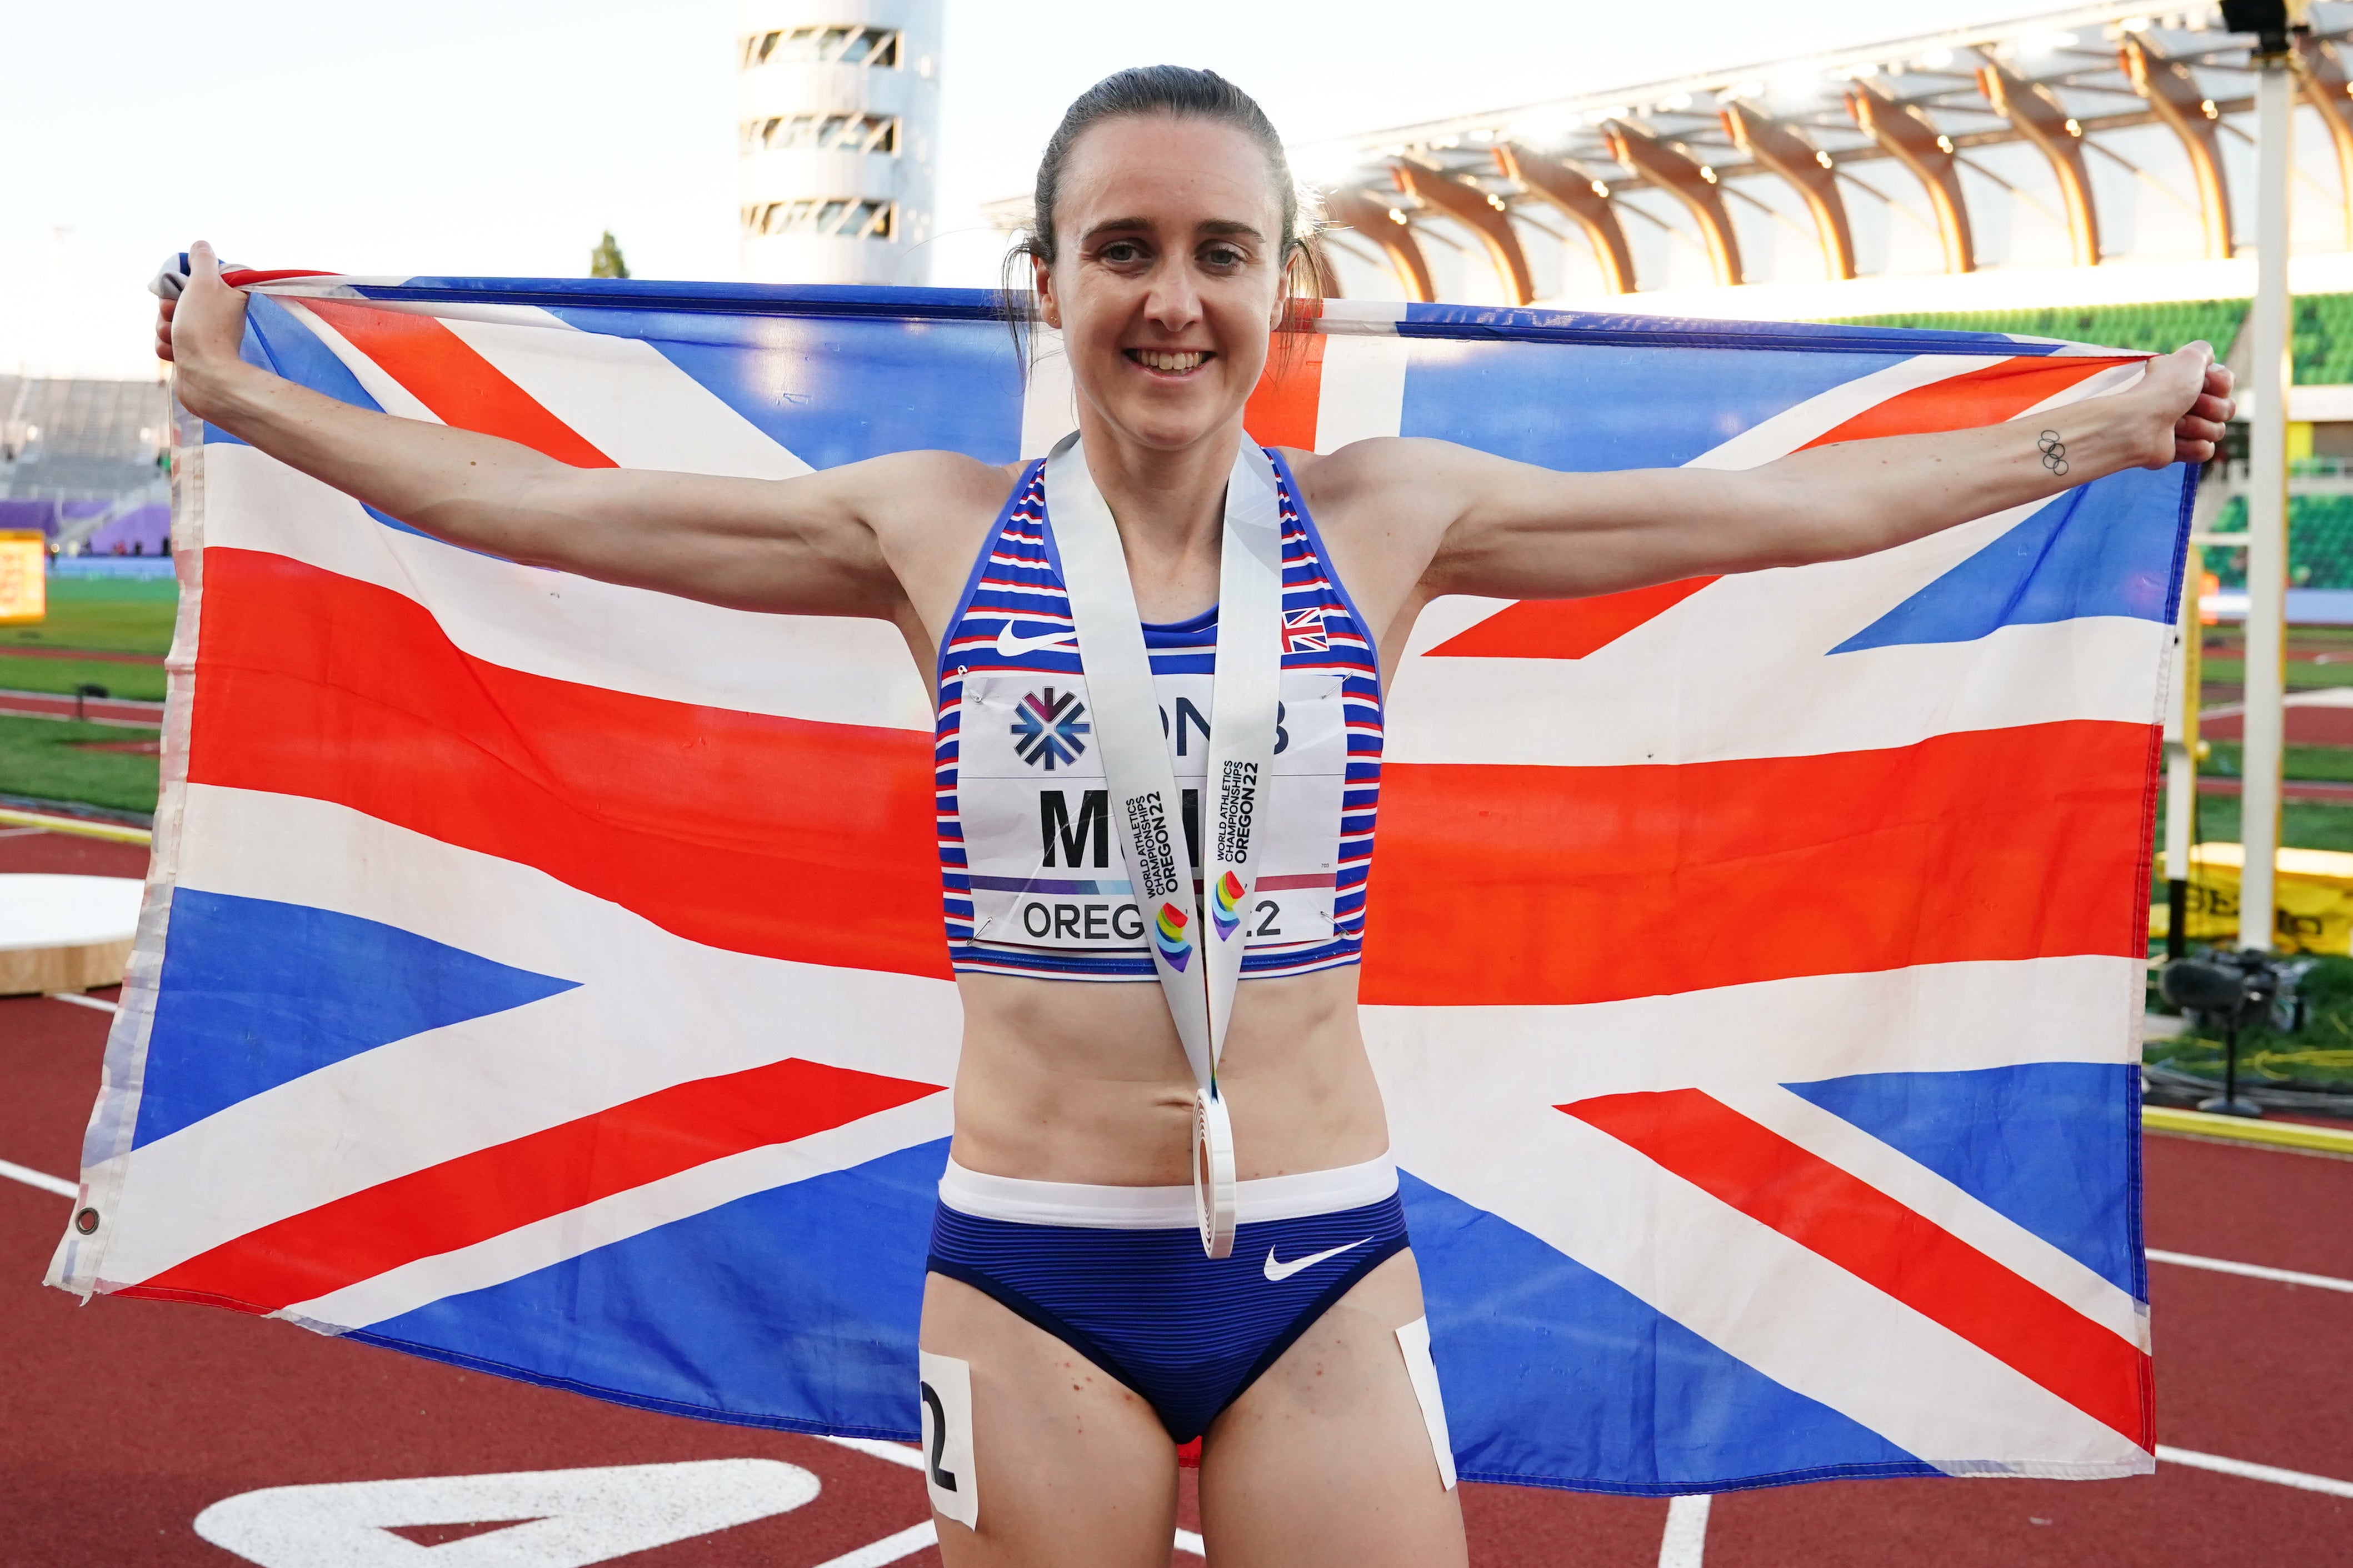 Great Britain’s Laura Muir shows off her bronze medal